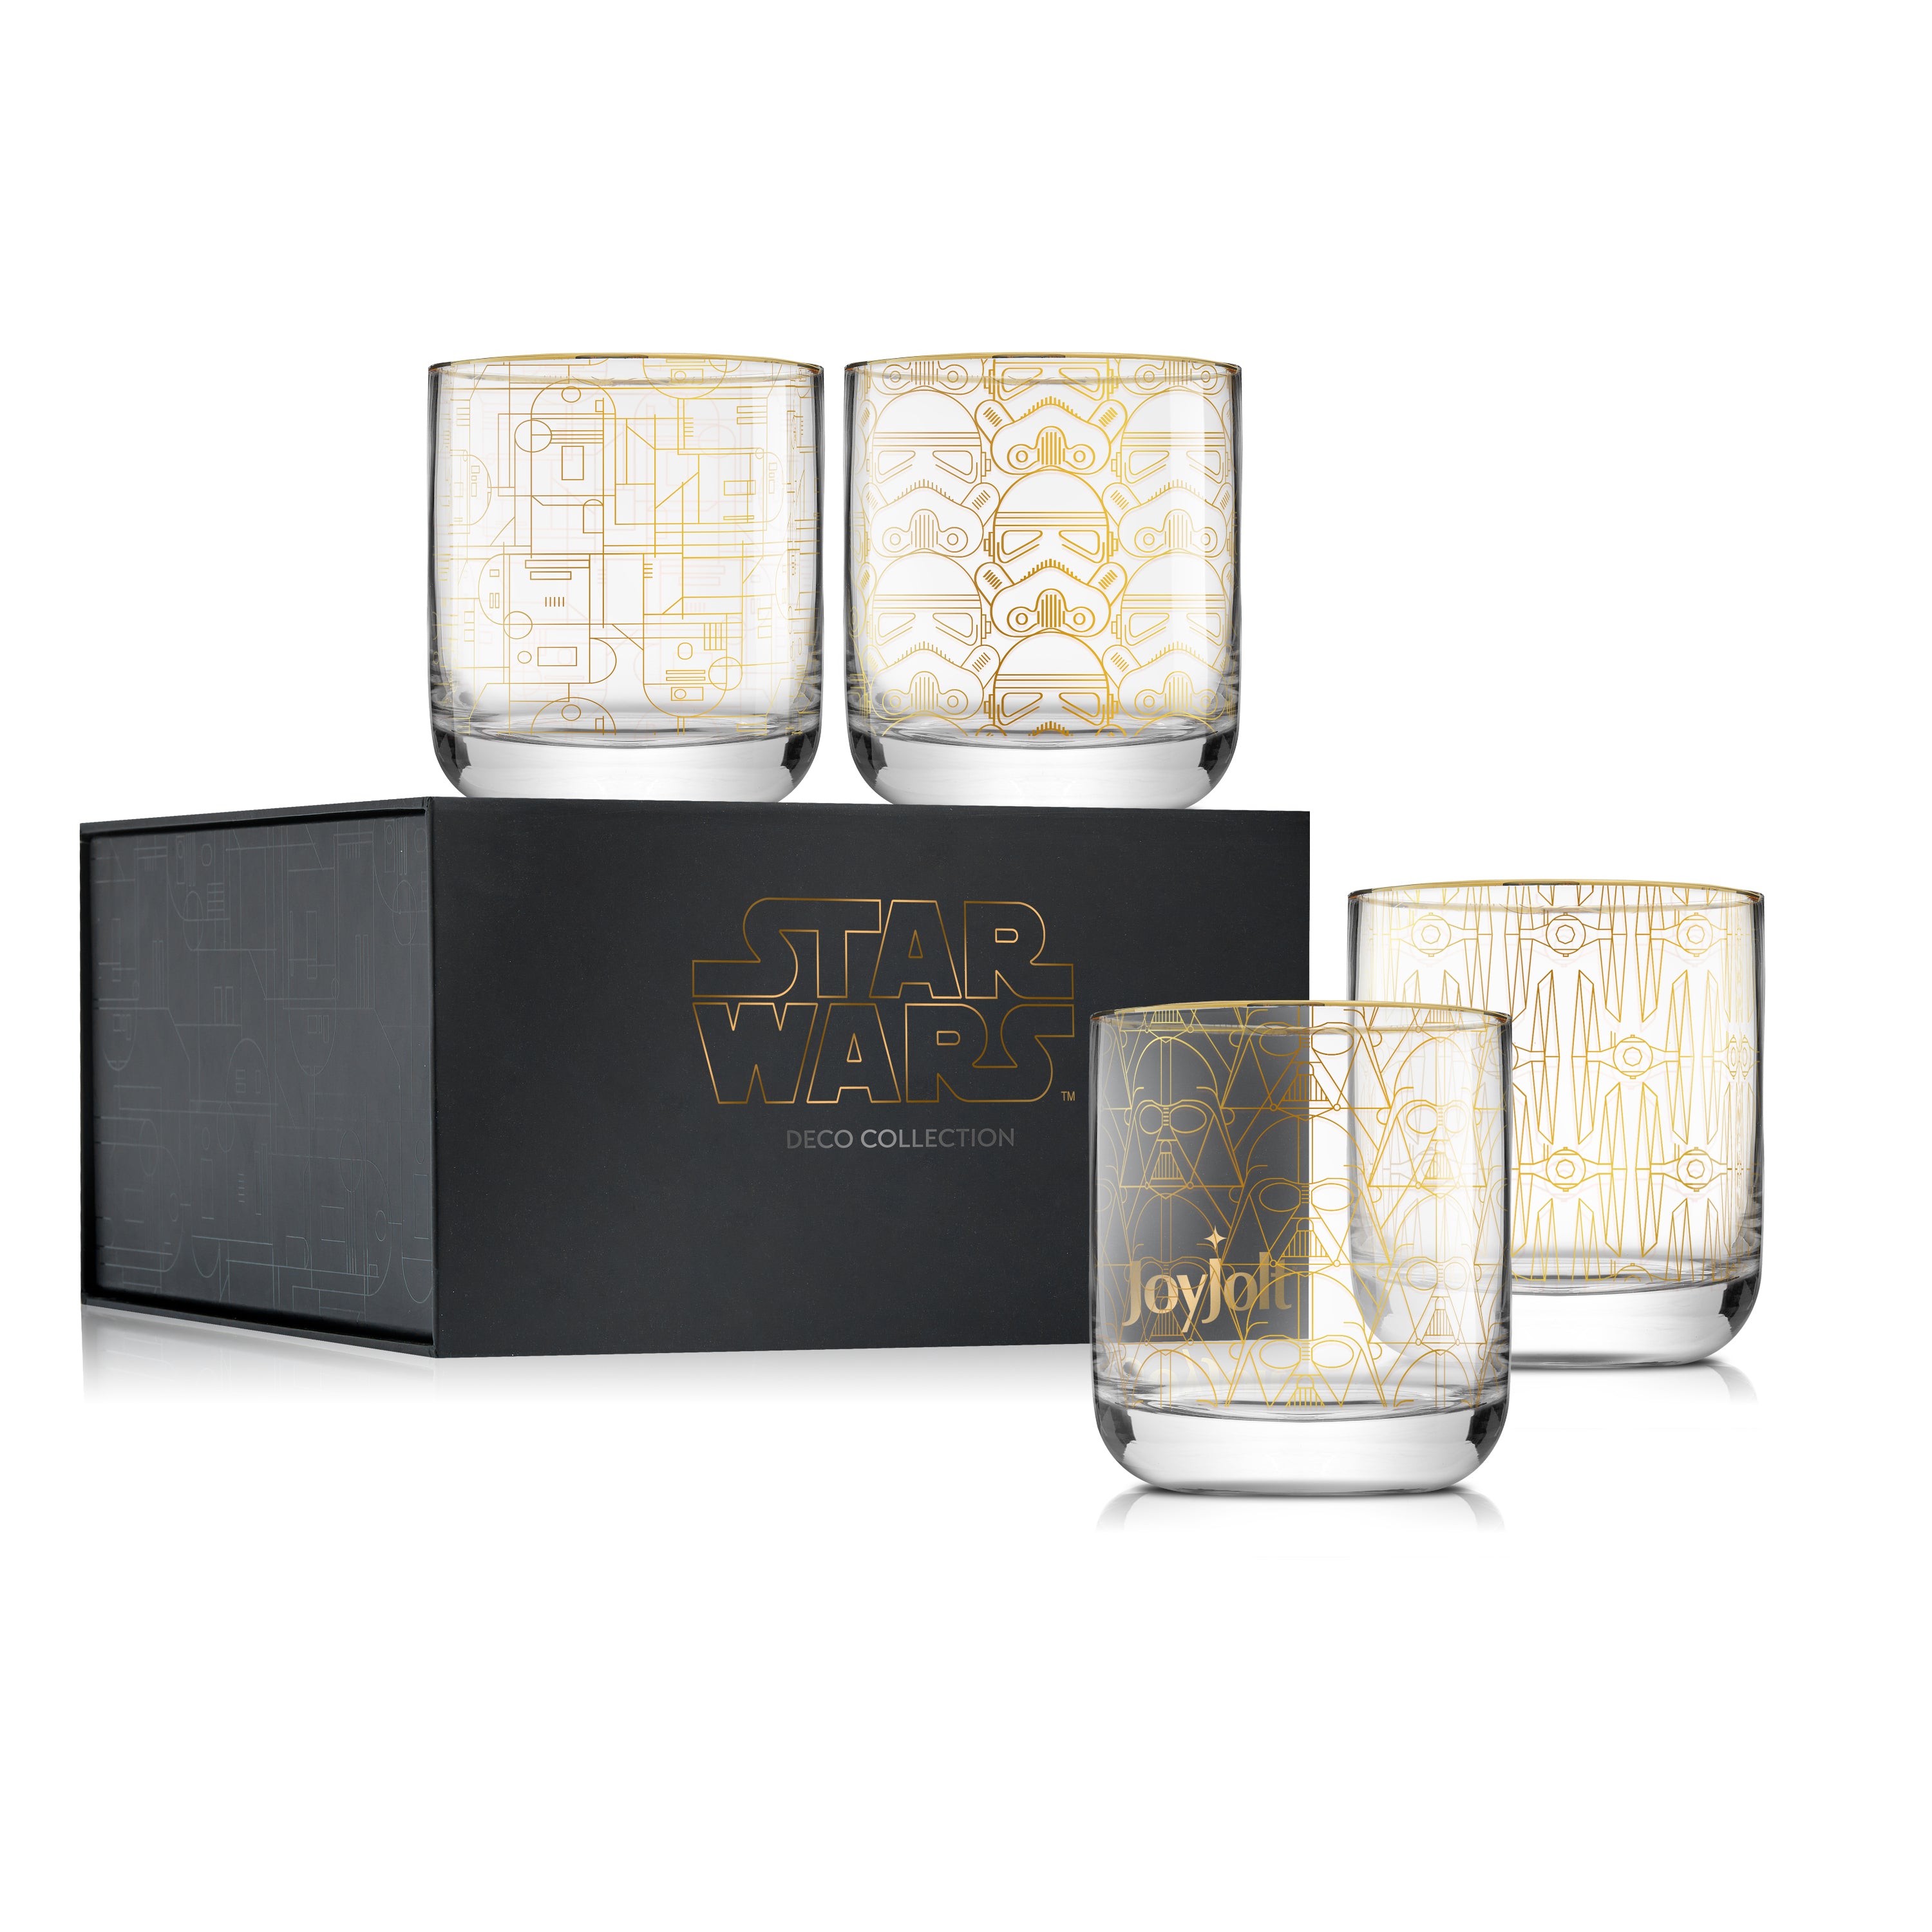 Star Wars™ Limited Edition Deco Collection Short Glasses